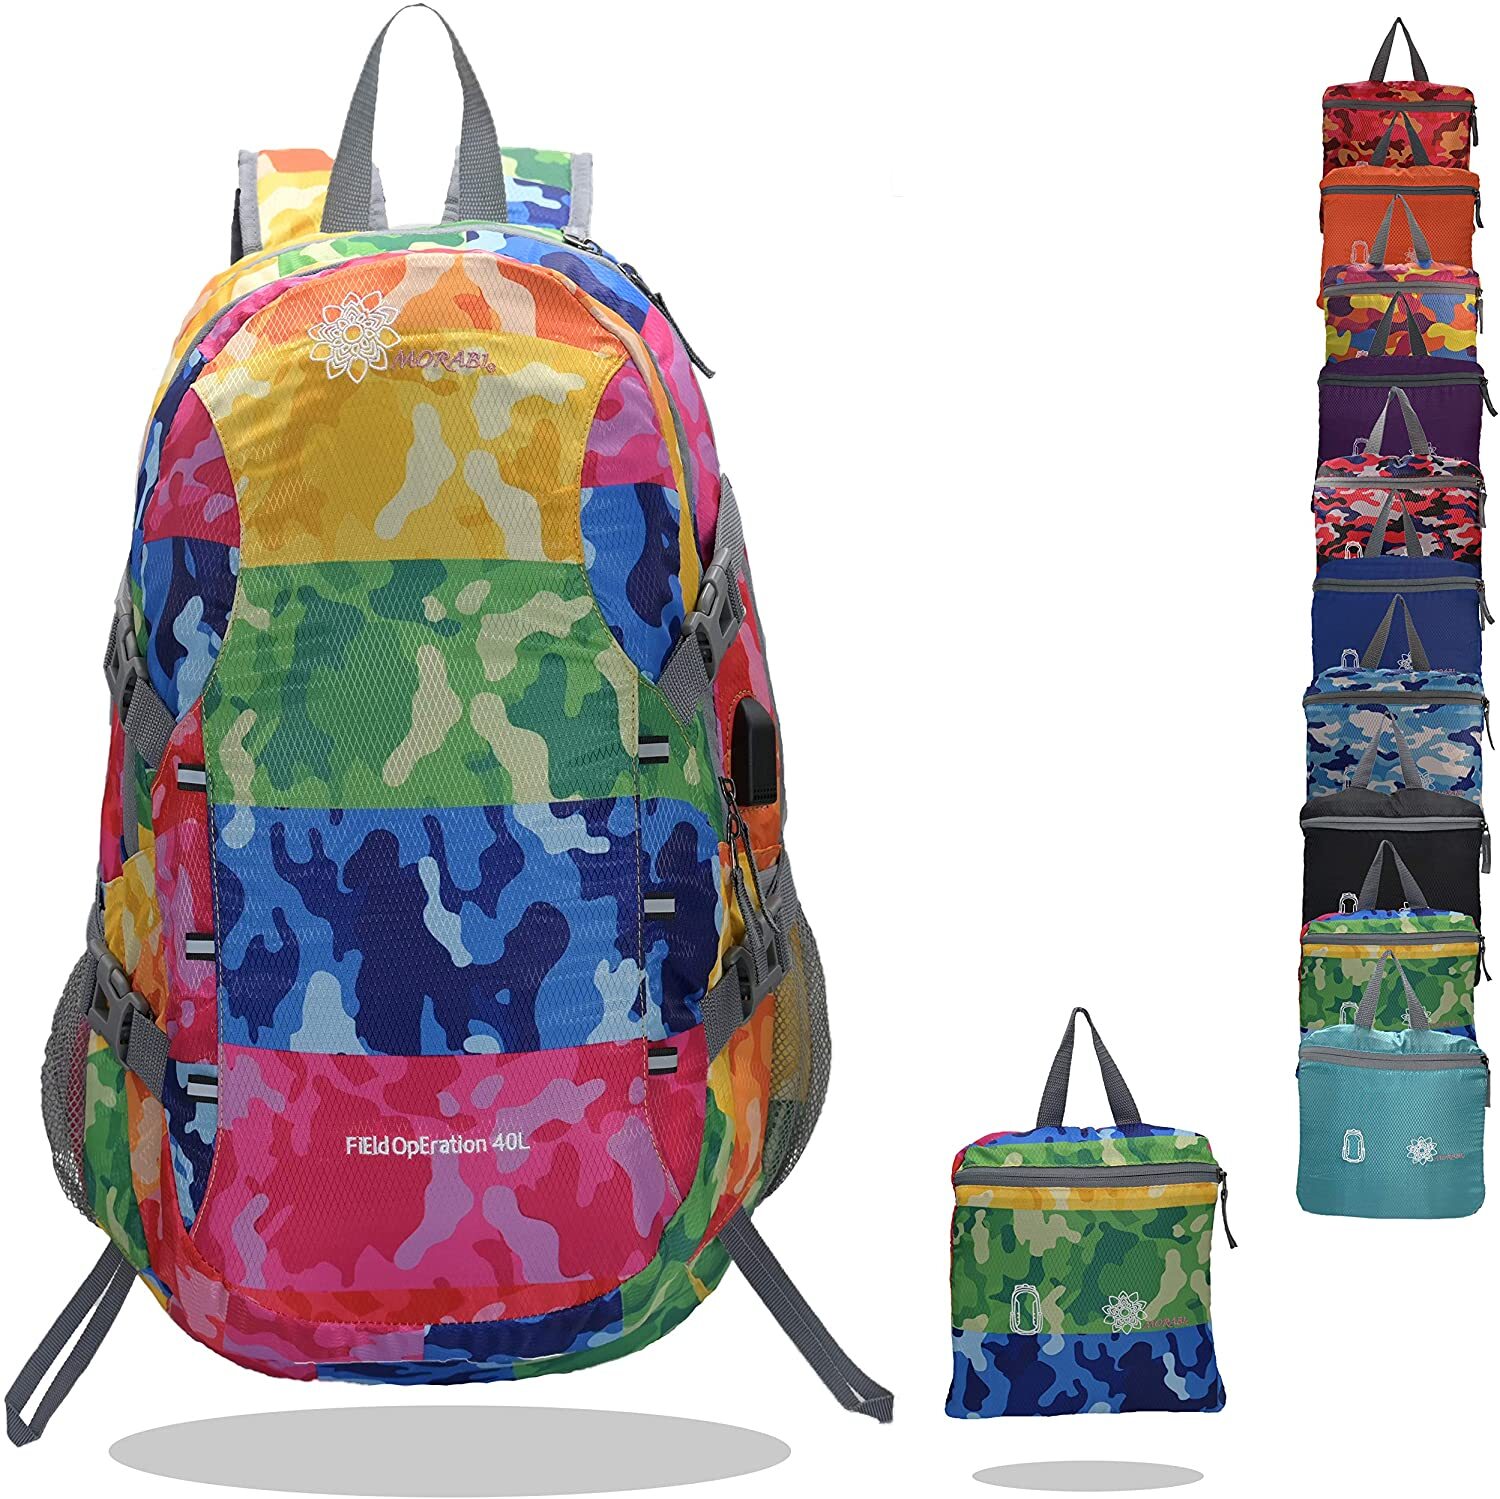 Camping Backpack - Colorful Rainbow Stripe